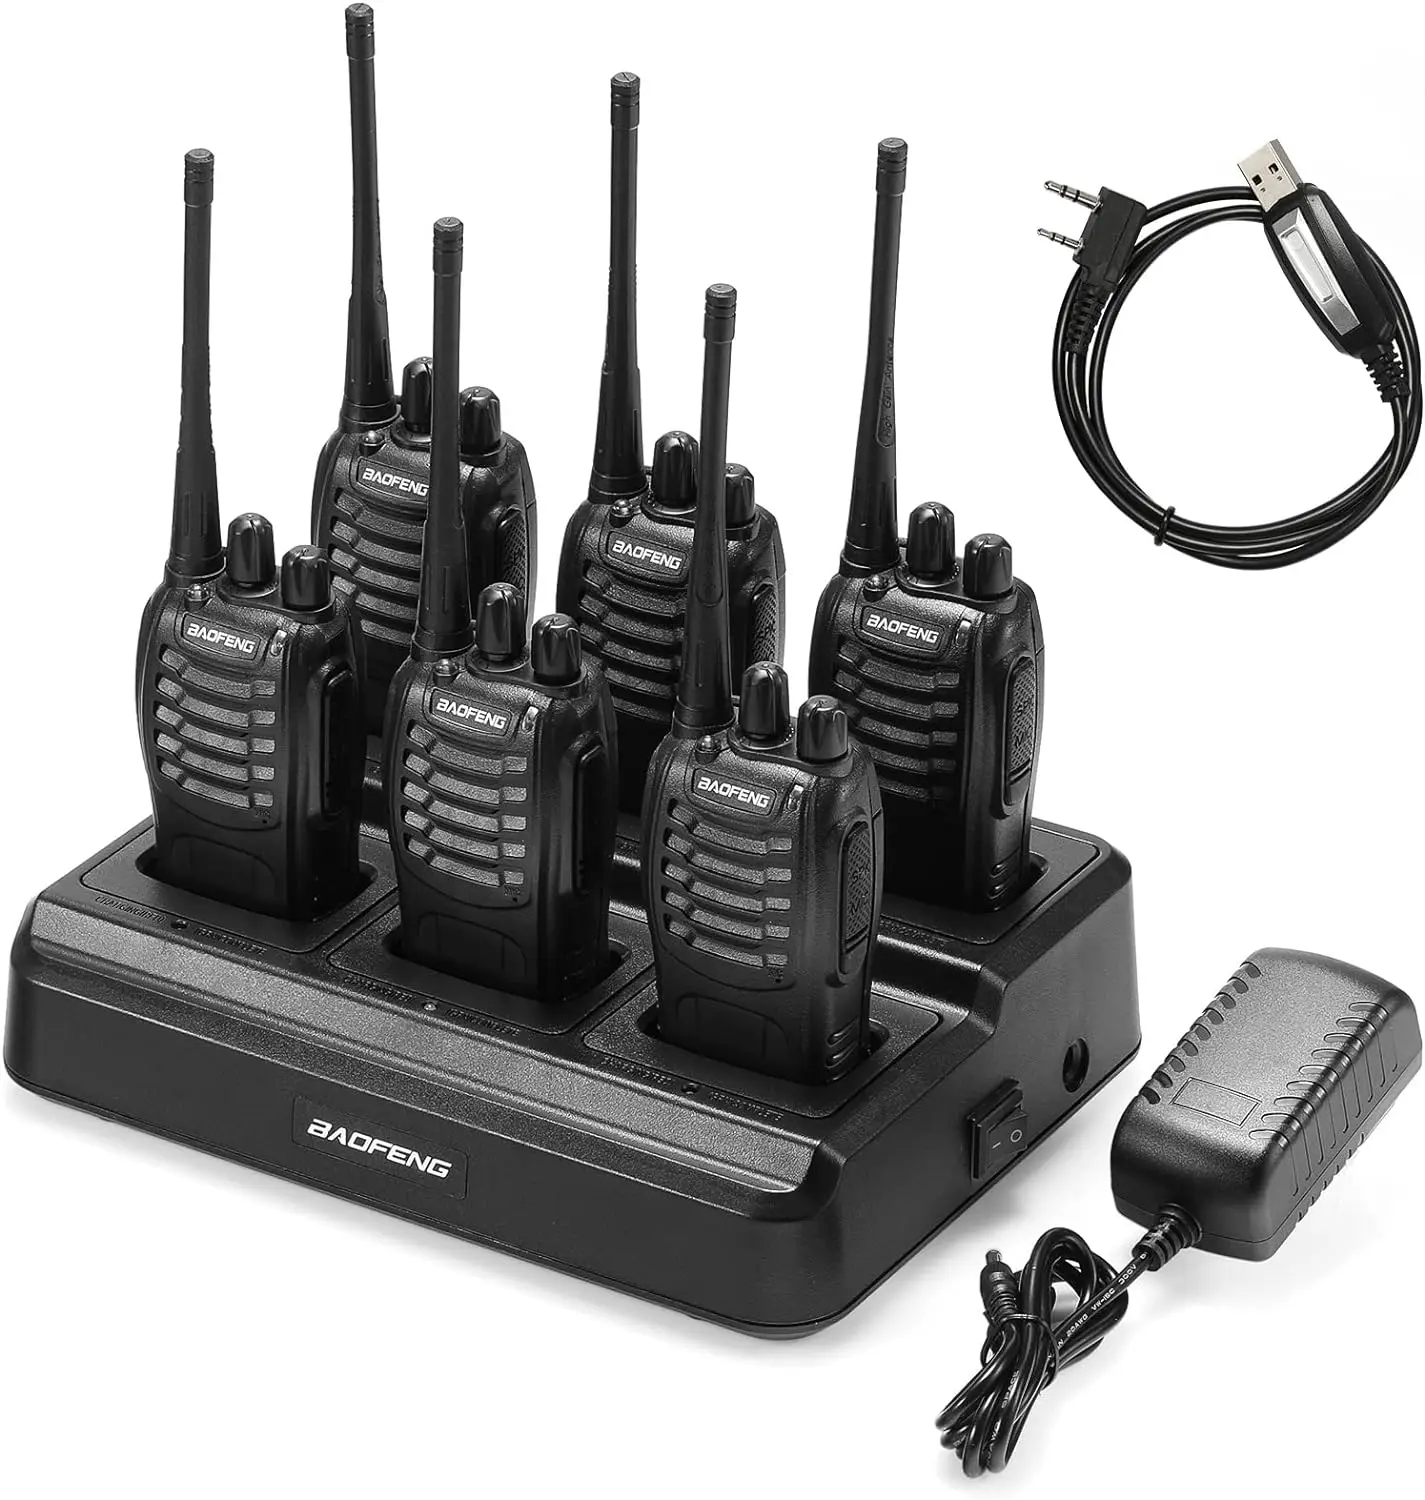 

BF-888S Walkie Talkie for Adults, Long Range Two Way Radio, 1500mAh 16 CH, 6 Radios 6 Earpieces 1 Six-way Charger 1 Cable